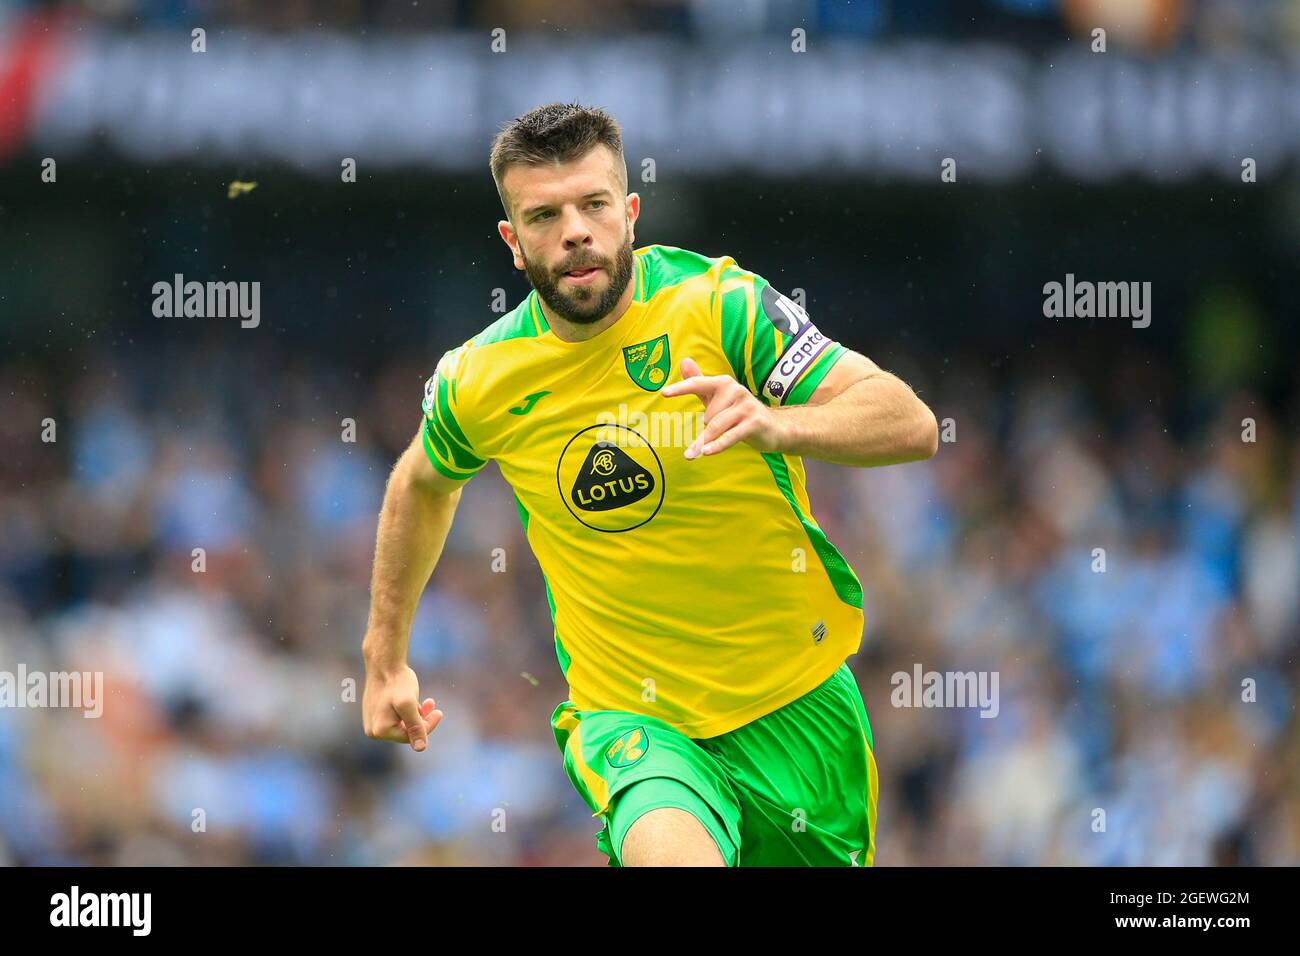 Manchester, UK. 21st Aug, 2021. Grant Hanley #5 of Norwich City in Manchester, United Kingdom on 8/21/2021. (Photo by Conor Molloy/News Images/Sipa USA) Credit: Sipa USA/Alamy Live News Stock Photo